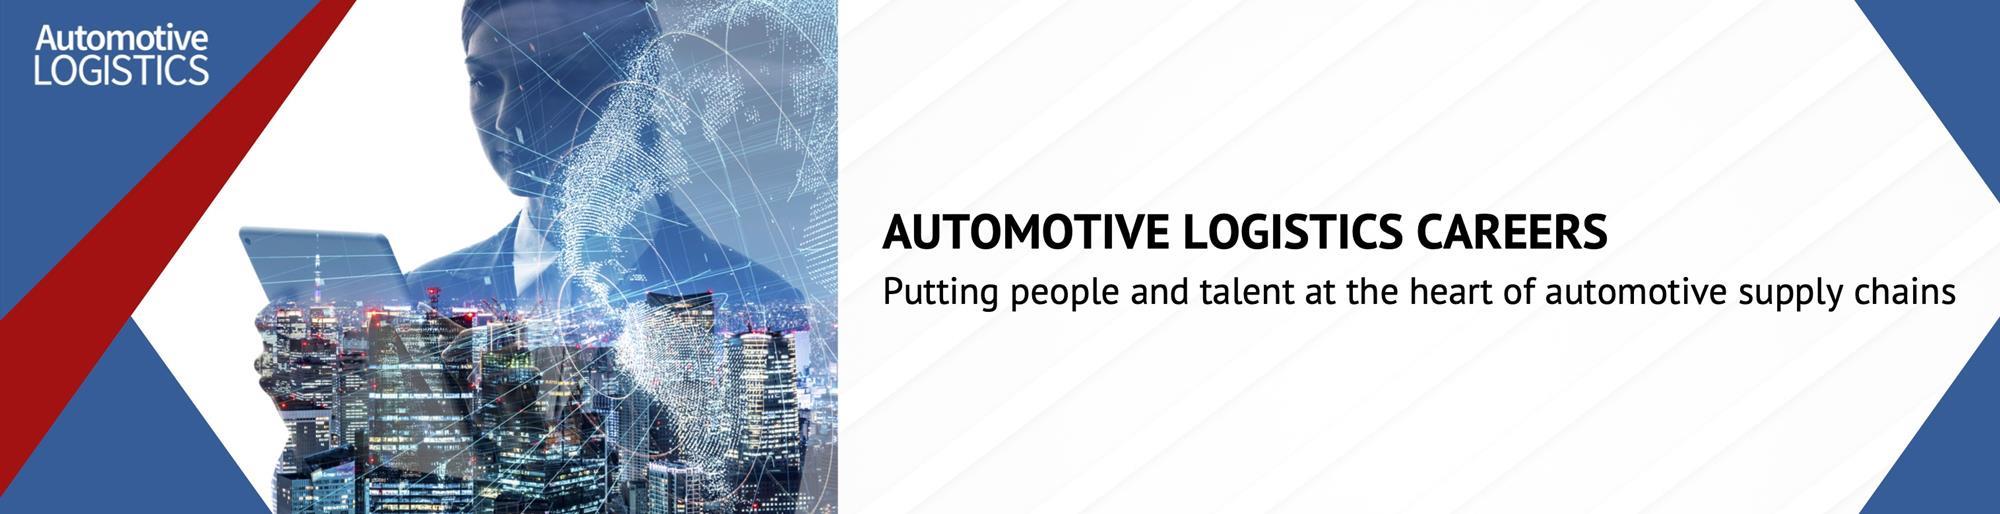 Automotive Logistics Careers - Putting people and talent at the heart of automotive supply chains